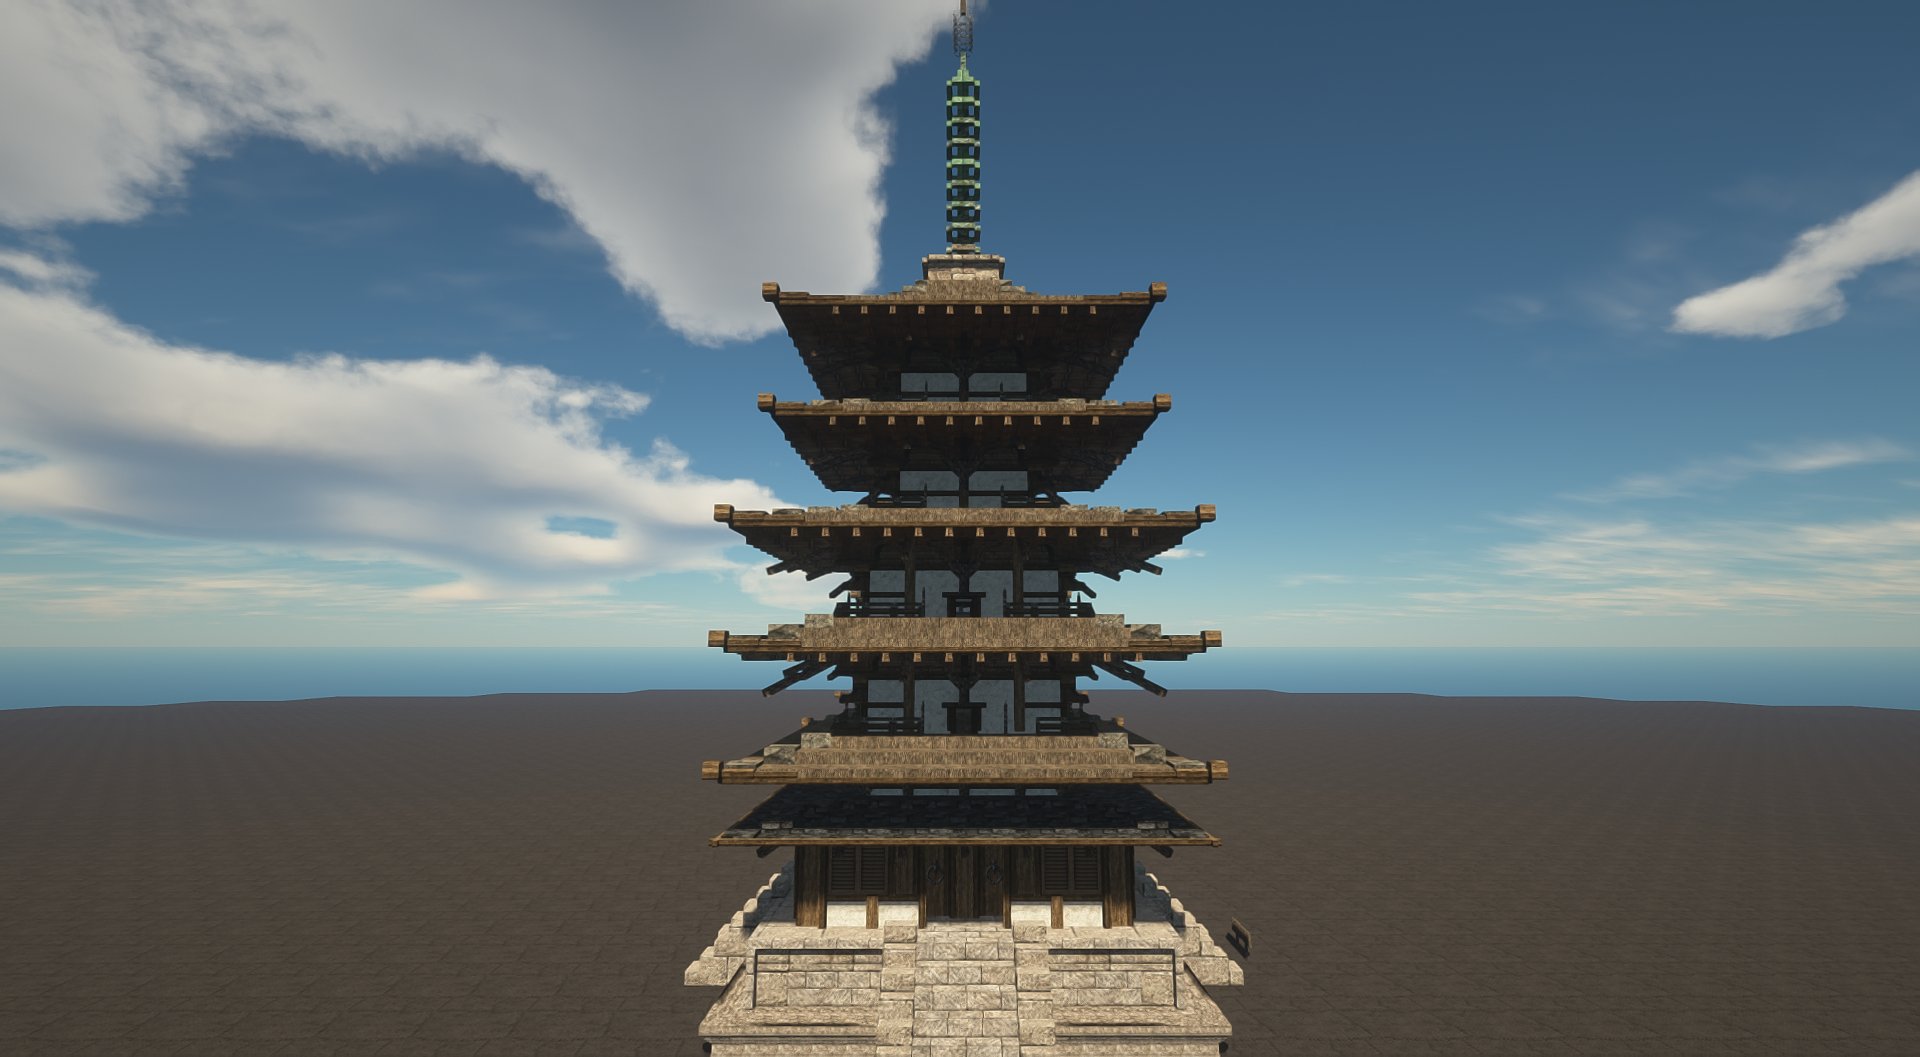 DiamondIsIconic on X: Made another pagoda using conquest reforged inspired  by the Chureito pagoda #Minecraft #Minecraftbuilds #conquestreforged  #WeAreConquest #Japanese  / X